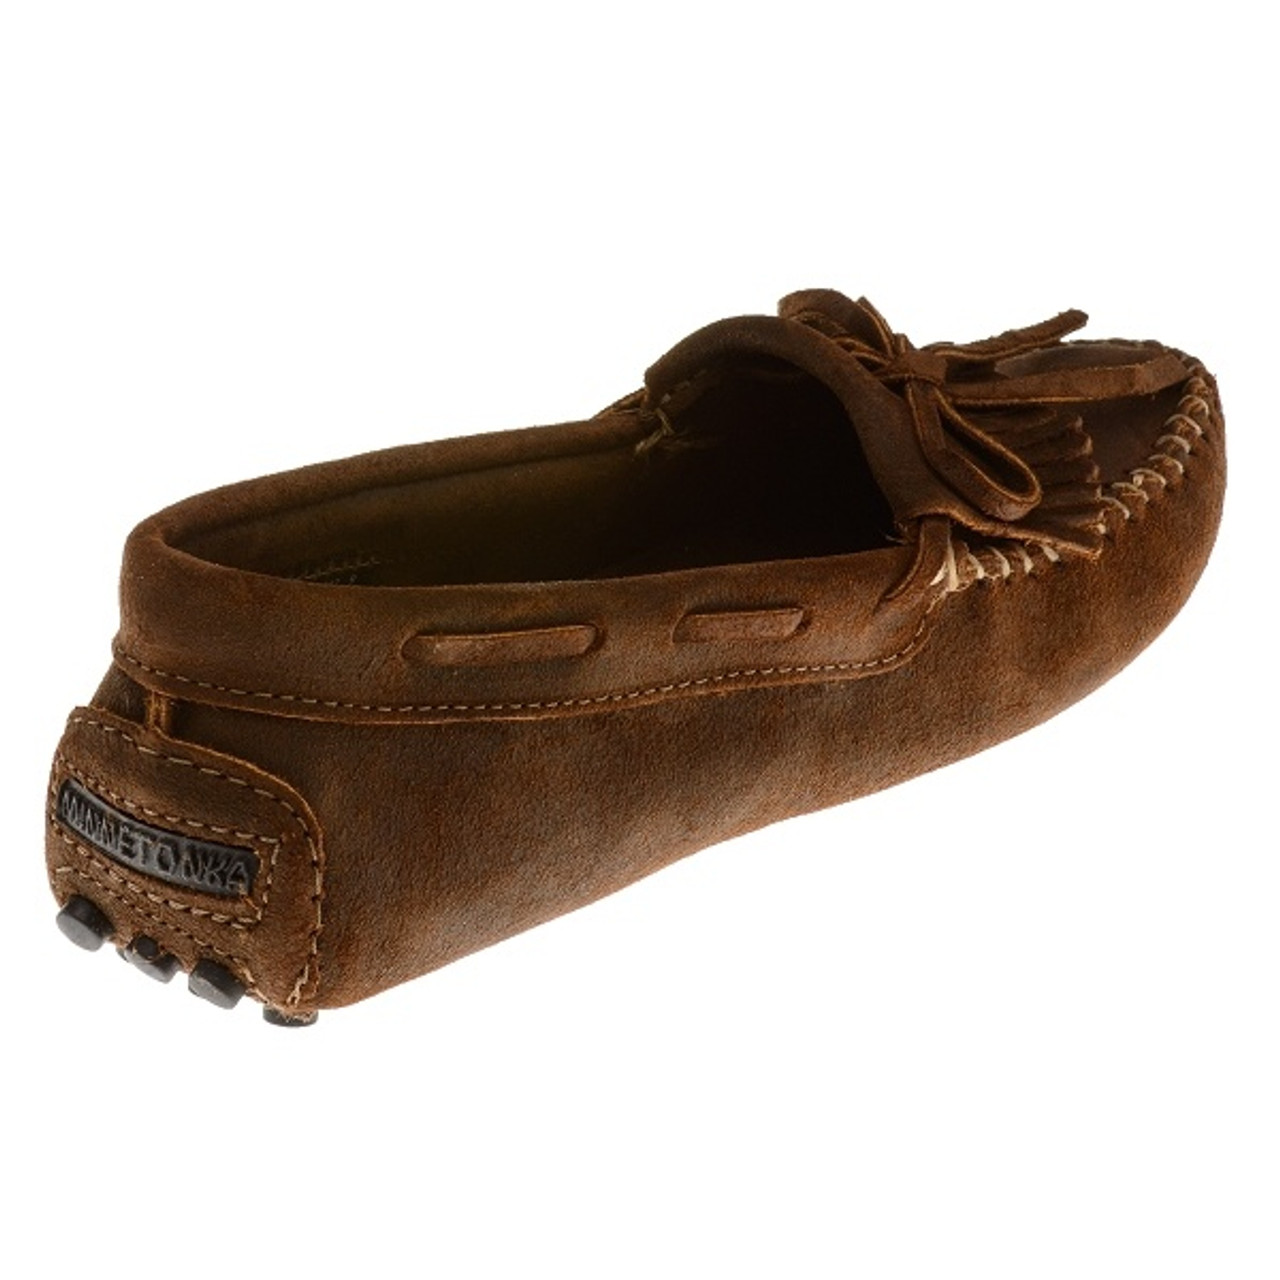 Men's Original Cowhide Driving Shoes by Minnetonka Moccasin